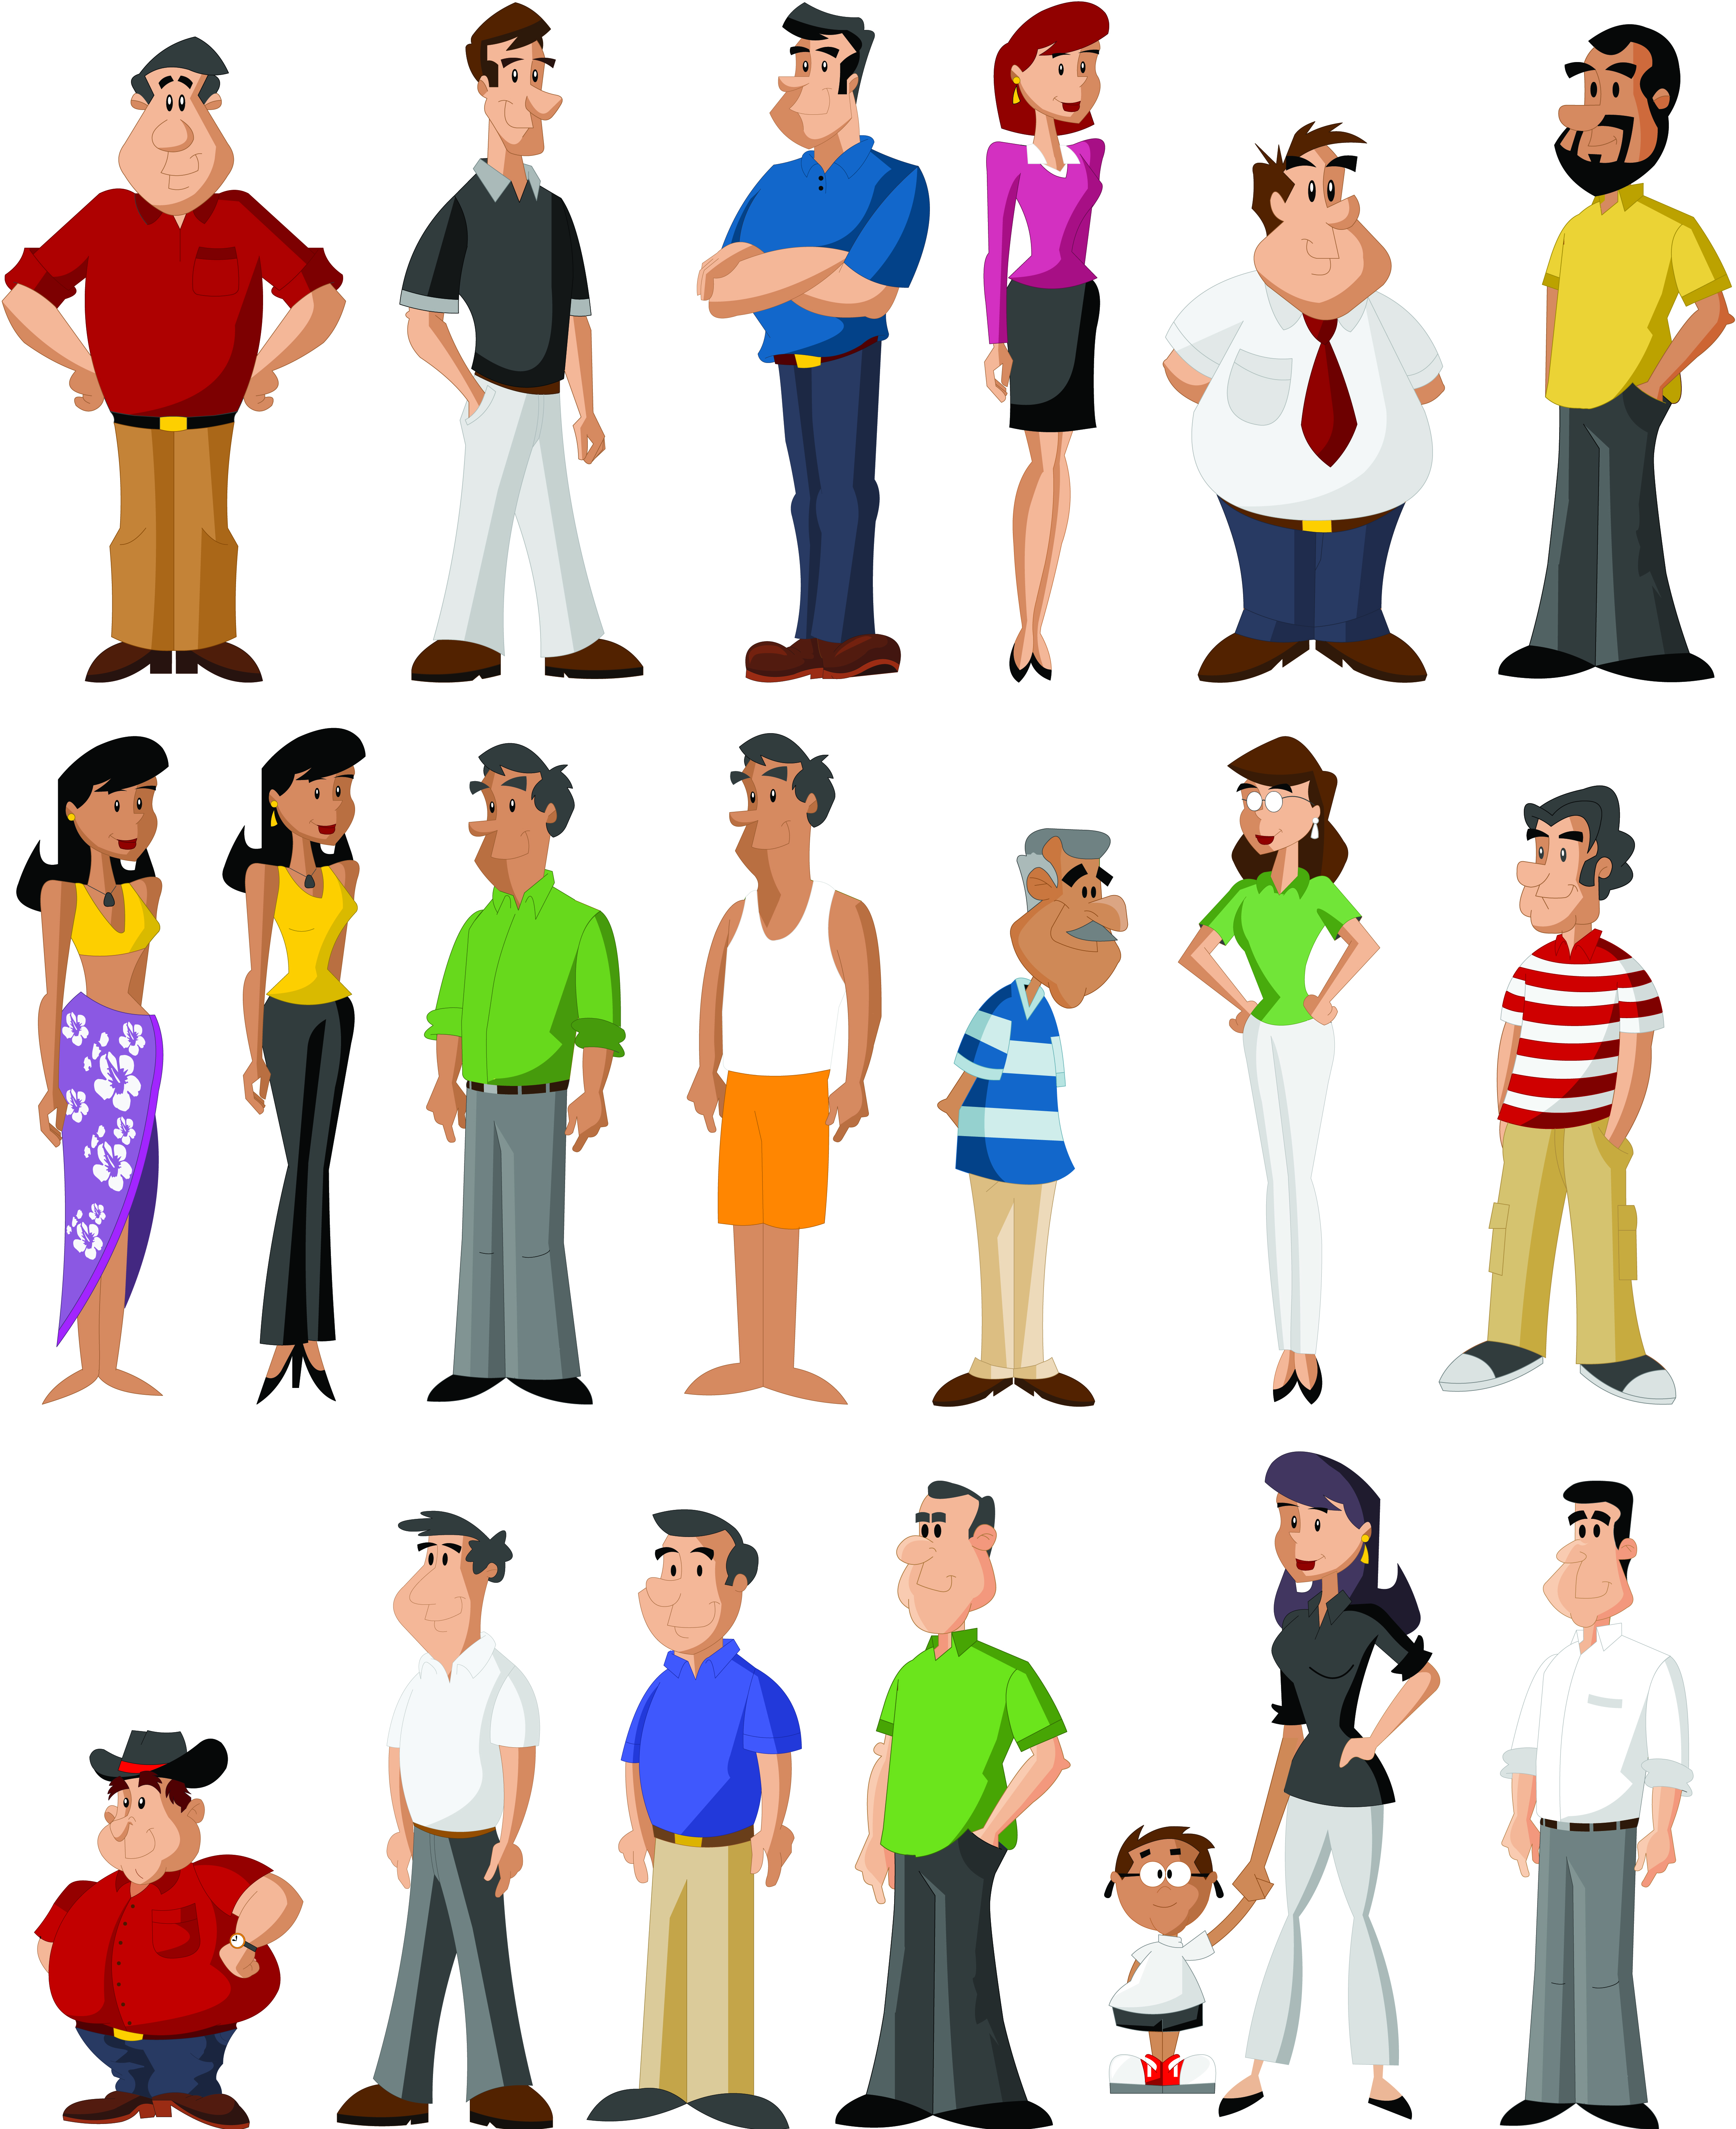 Free Cartoon People Images, Download Free Cartoon People Images png images,  Free ClipArts on Clipart Library